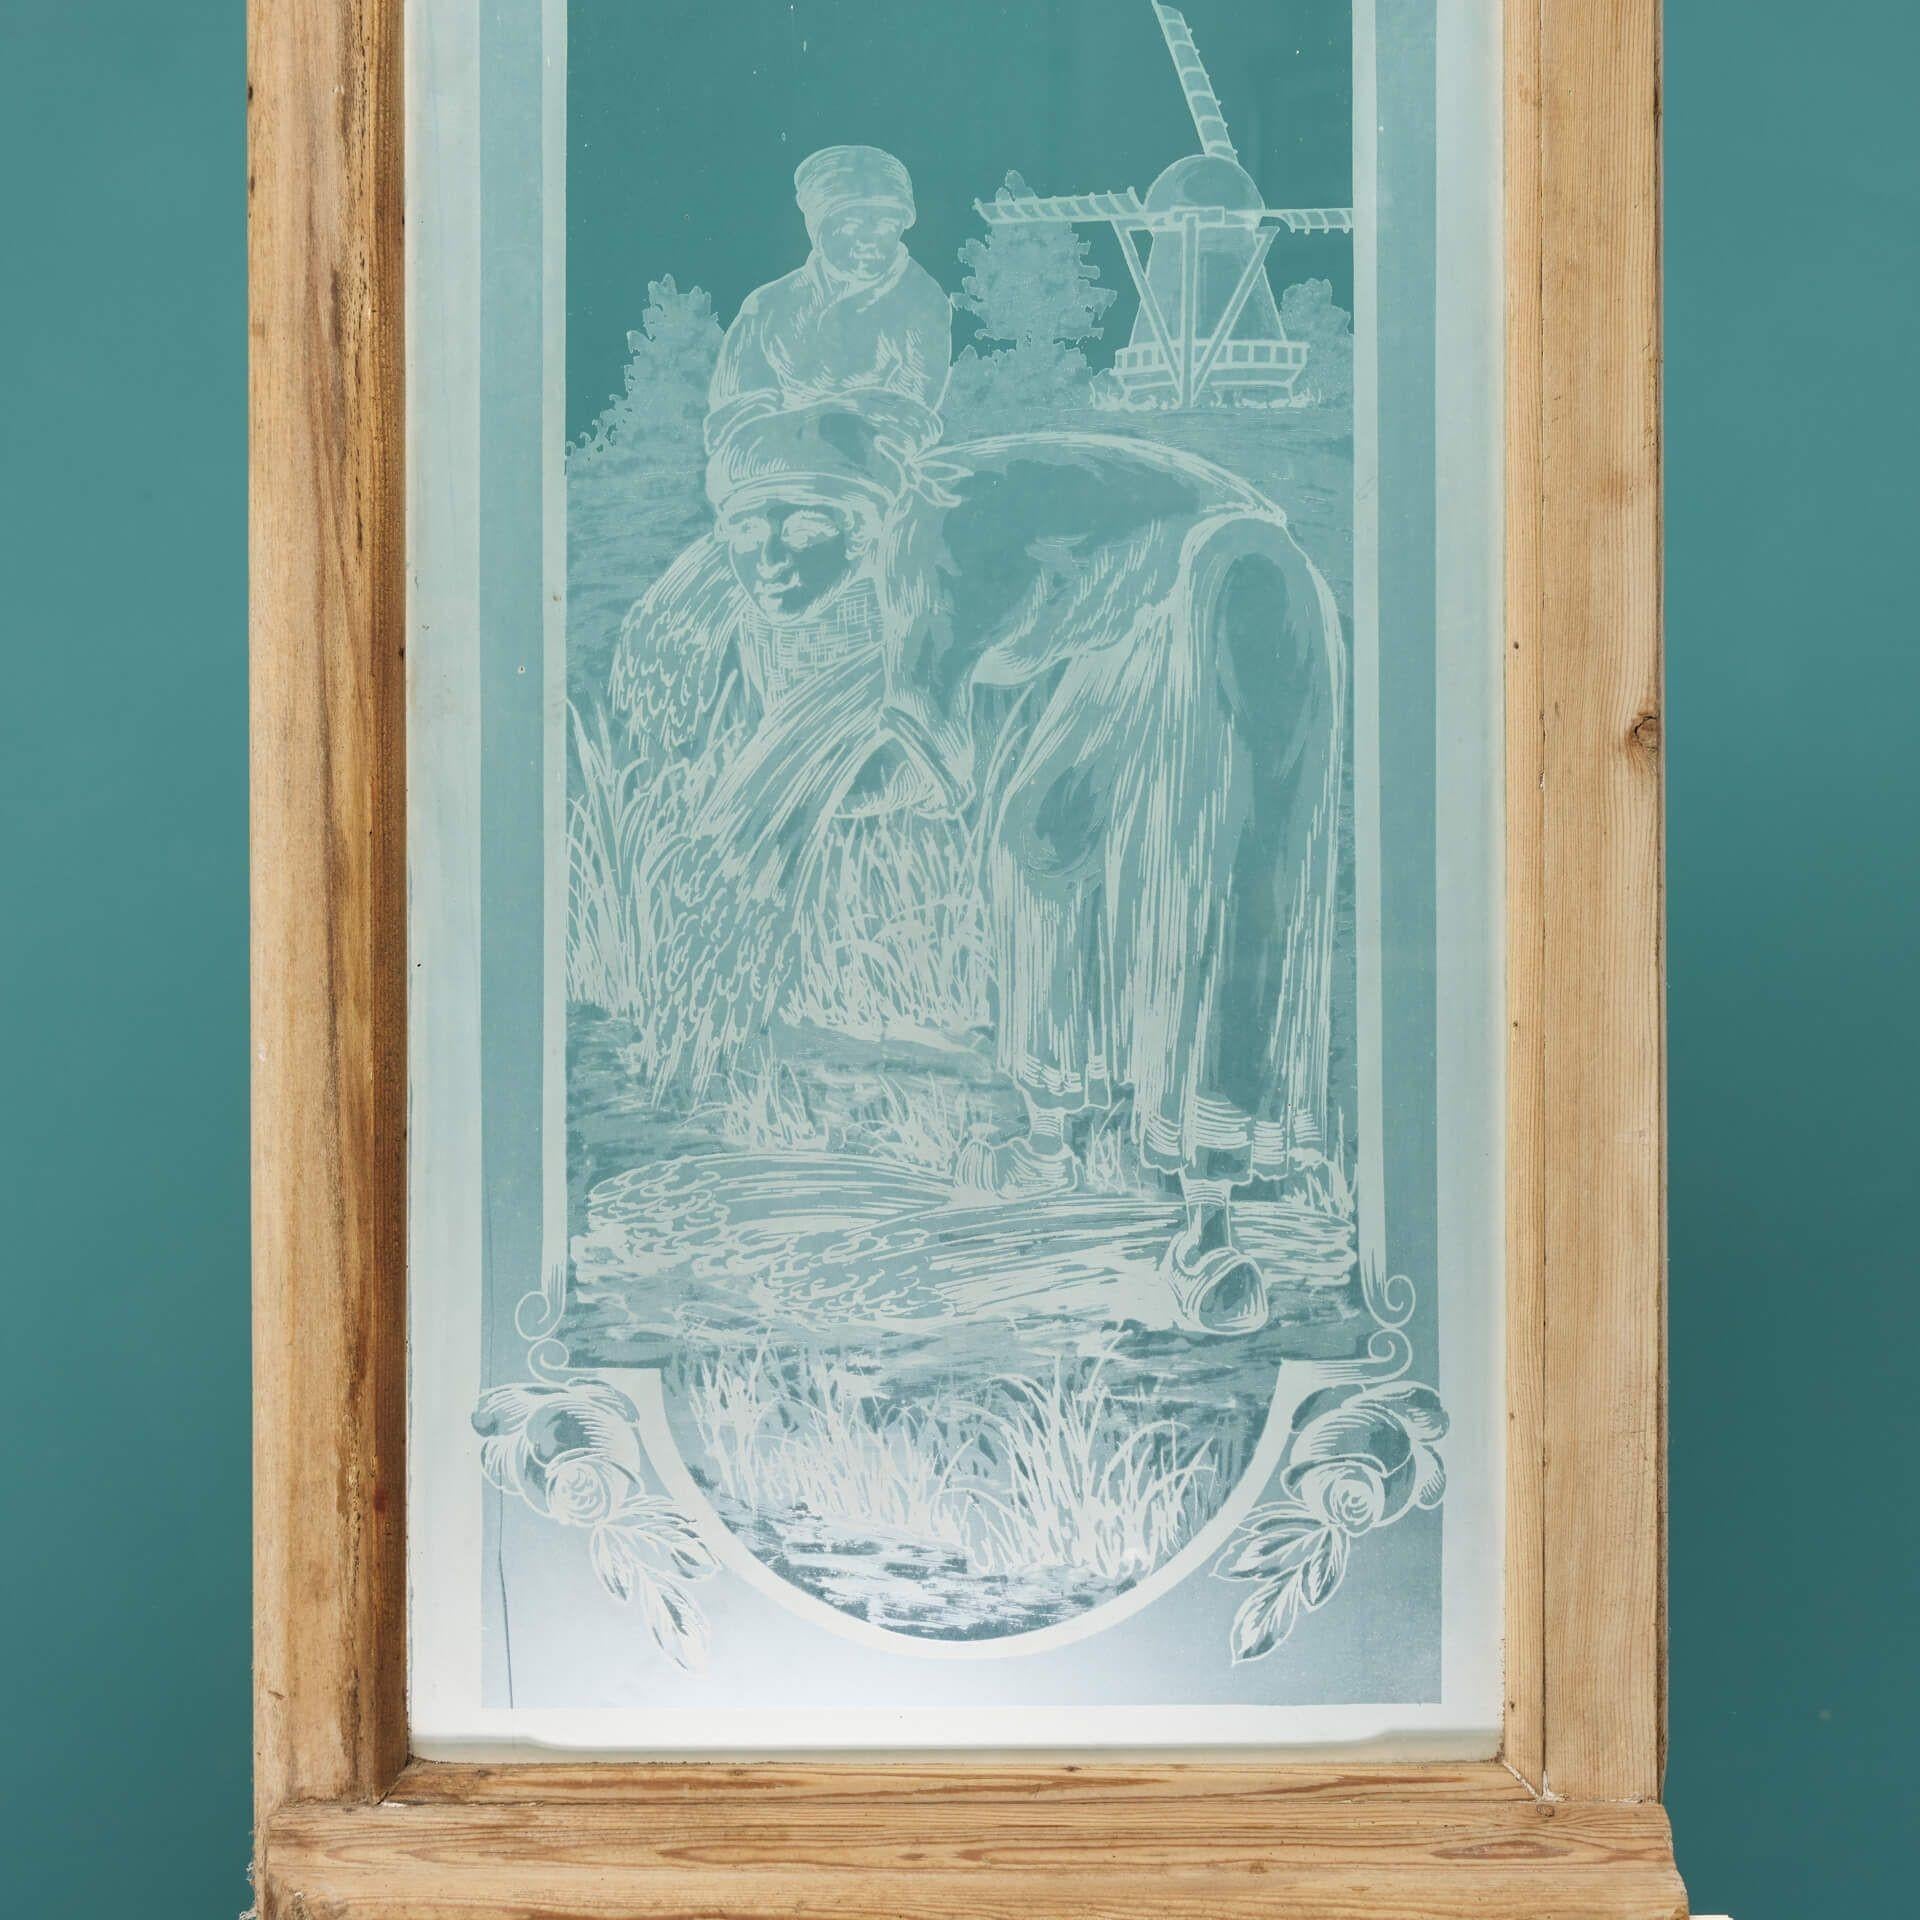 A pair of antique acid etched glass windows depicting a traditional rural scene of farmers in a wheat field. Originating from the Netherlands, this window portrays a classical Dutch scene, showing a man using a scythe or sickle to cut the wheat